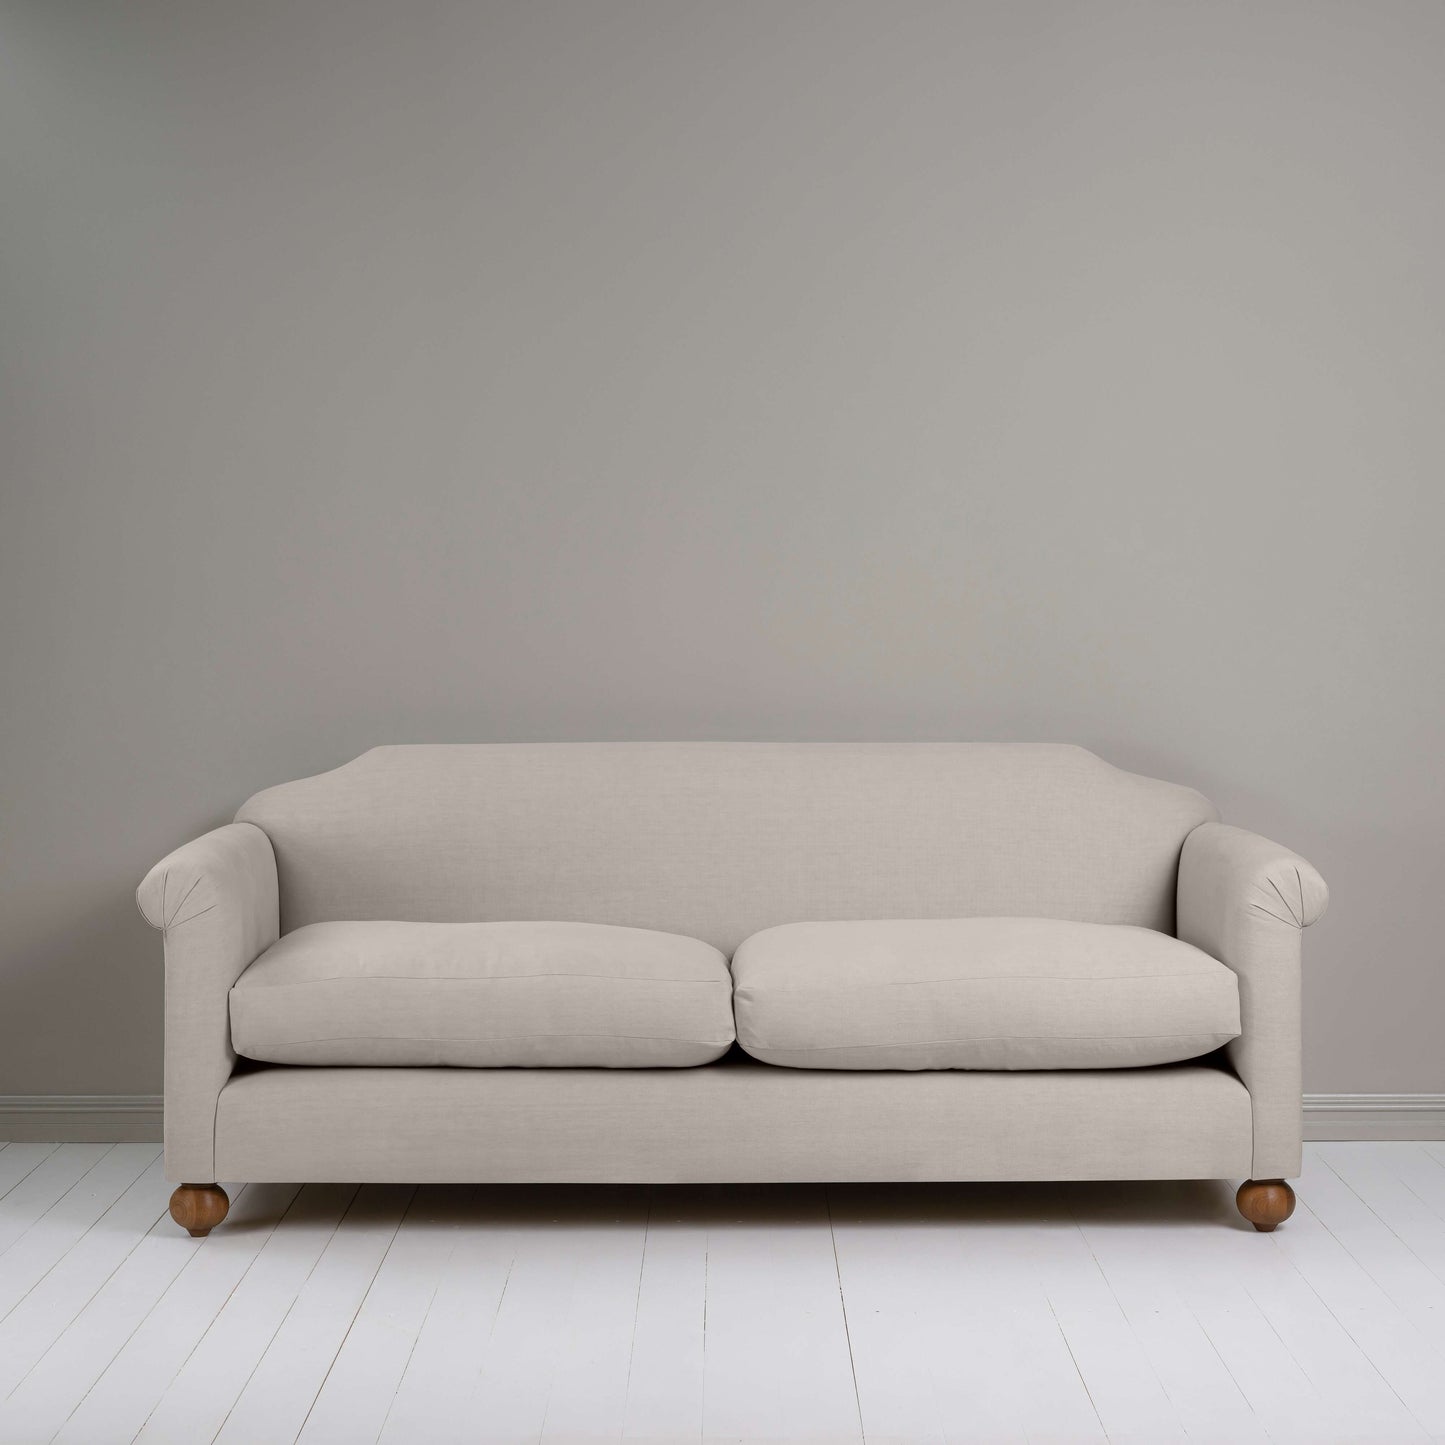 Dolittle 4 seater Sofa in Laidback Linen Pearl Grey